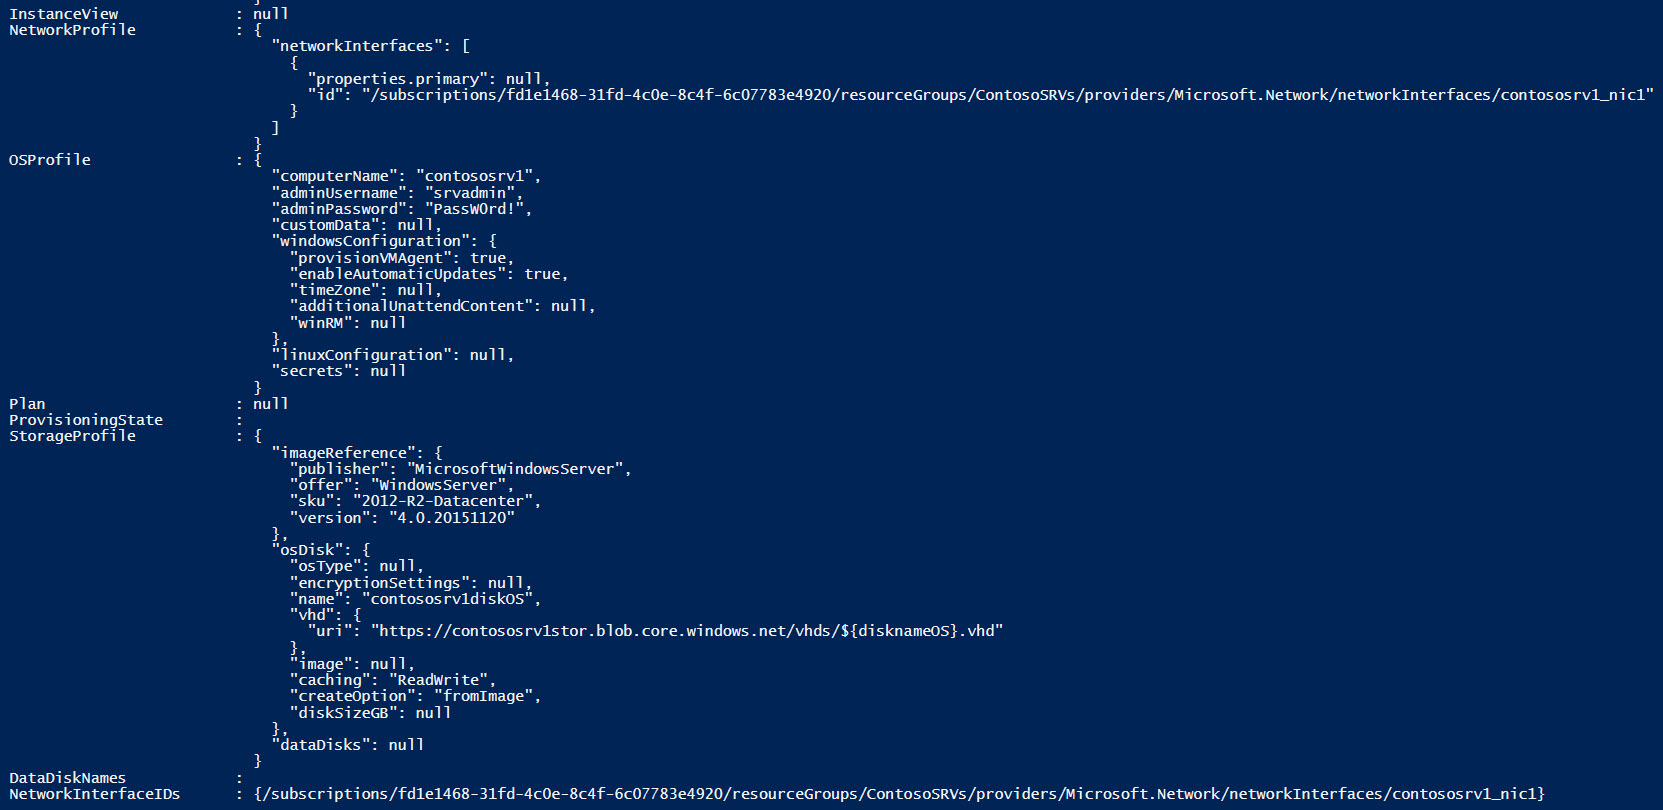 VM properties in Azure RM (Image Credit: Russell Smith)